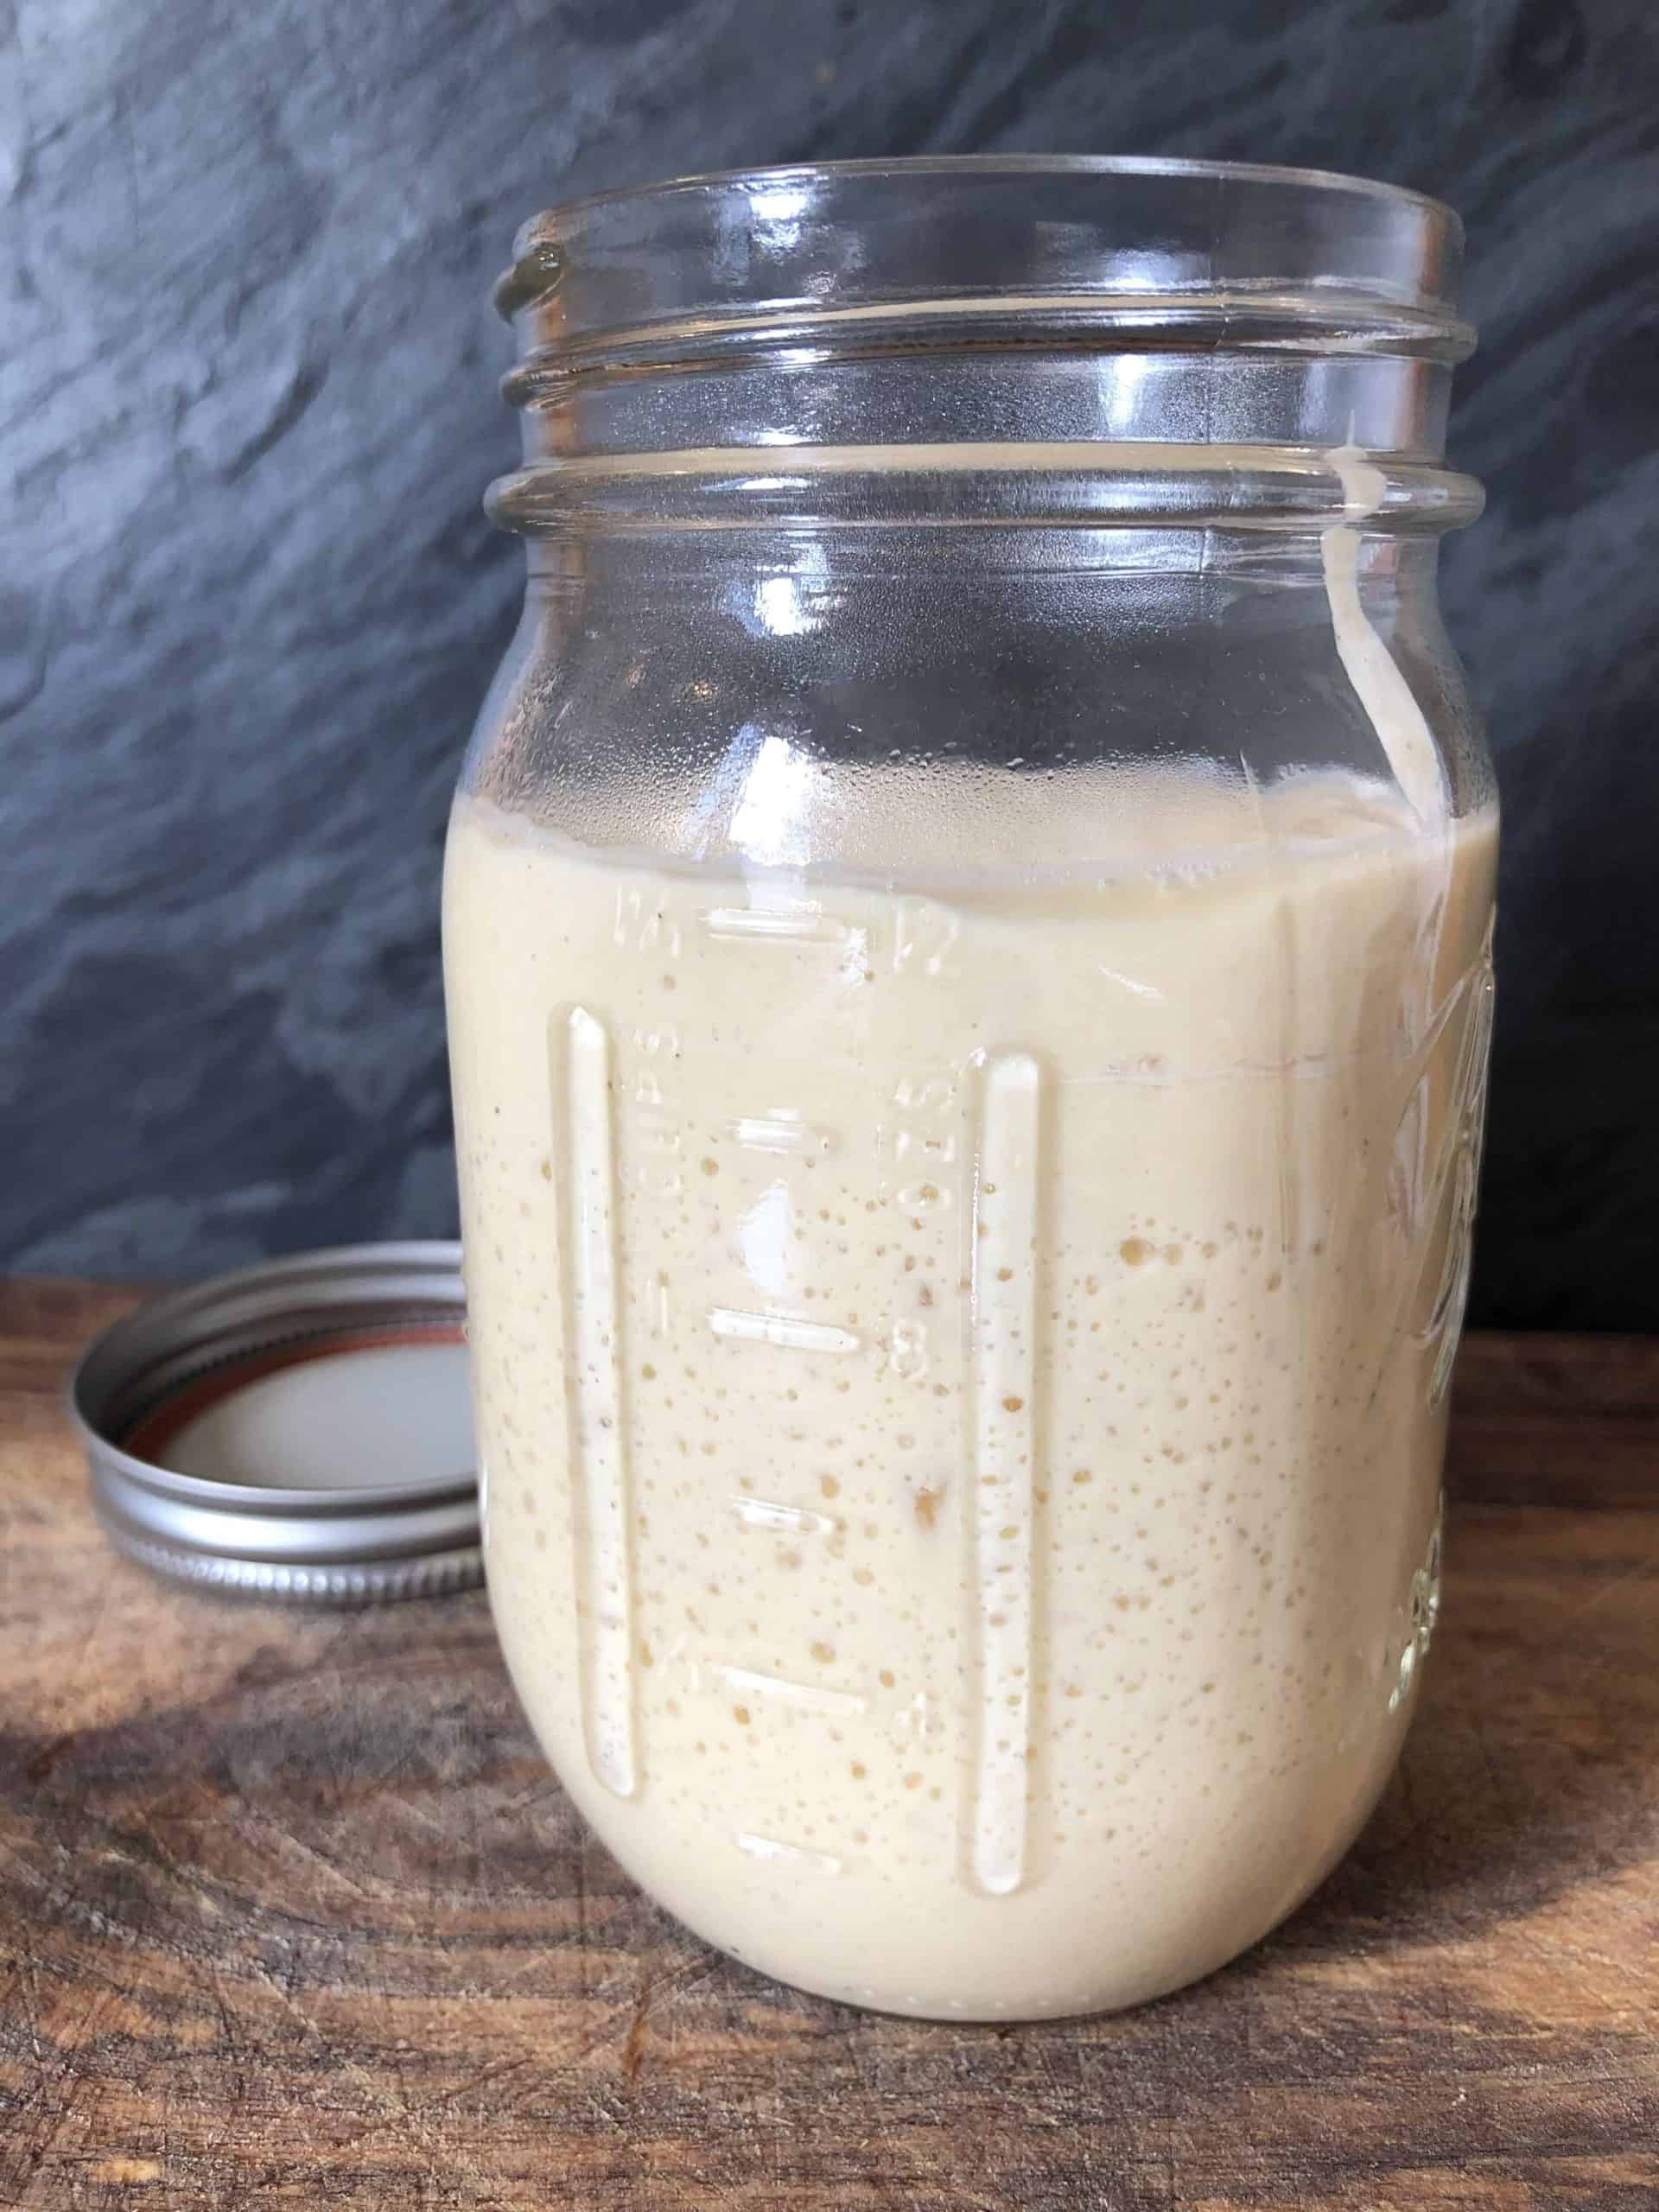 Looking for the perfect gluten free sourdough starter recipe to enable you to make sourdough bread or baked goods? Take a look at our simple recipe!